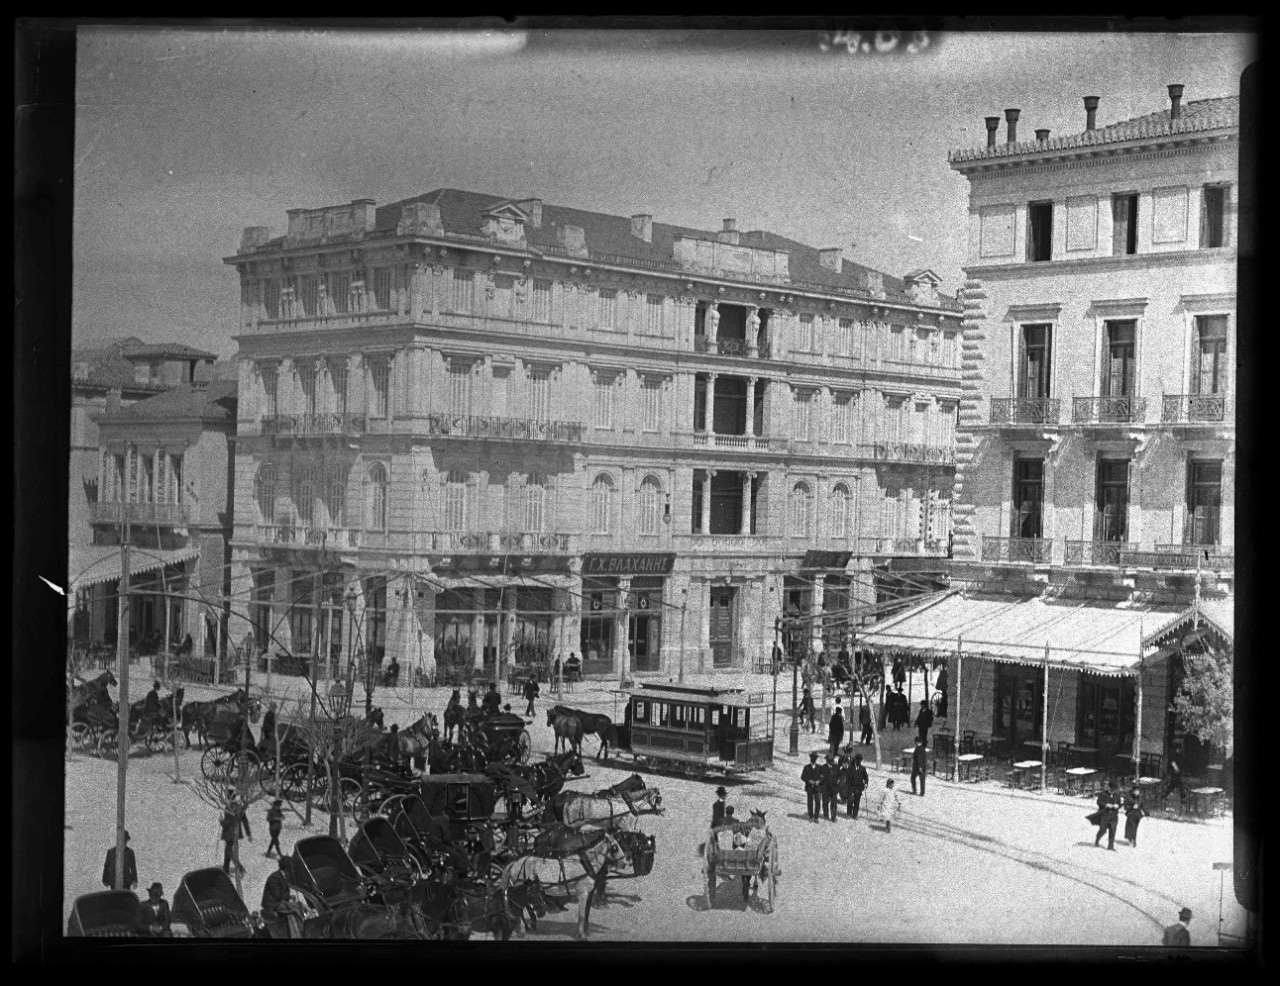 An image of Syntagma Square, in the centre of Athens. Viewers were able to decipher - from the tram-horses and buildings featured in the image - that the photo was likely taken in the first decade of the 20th century.  Credit: NM2007.14.3.